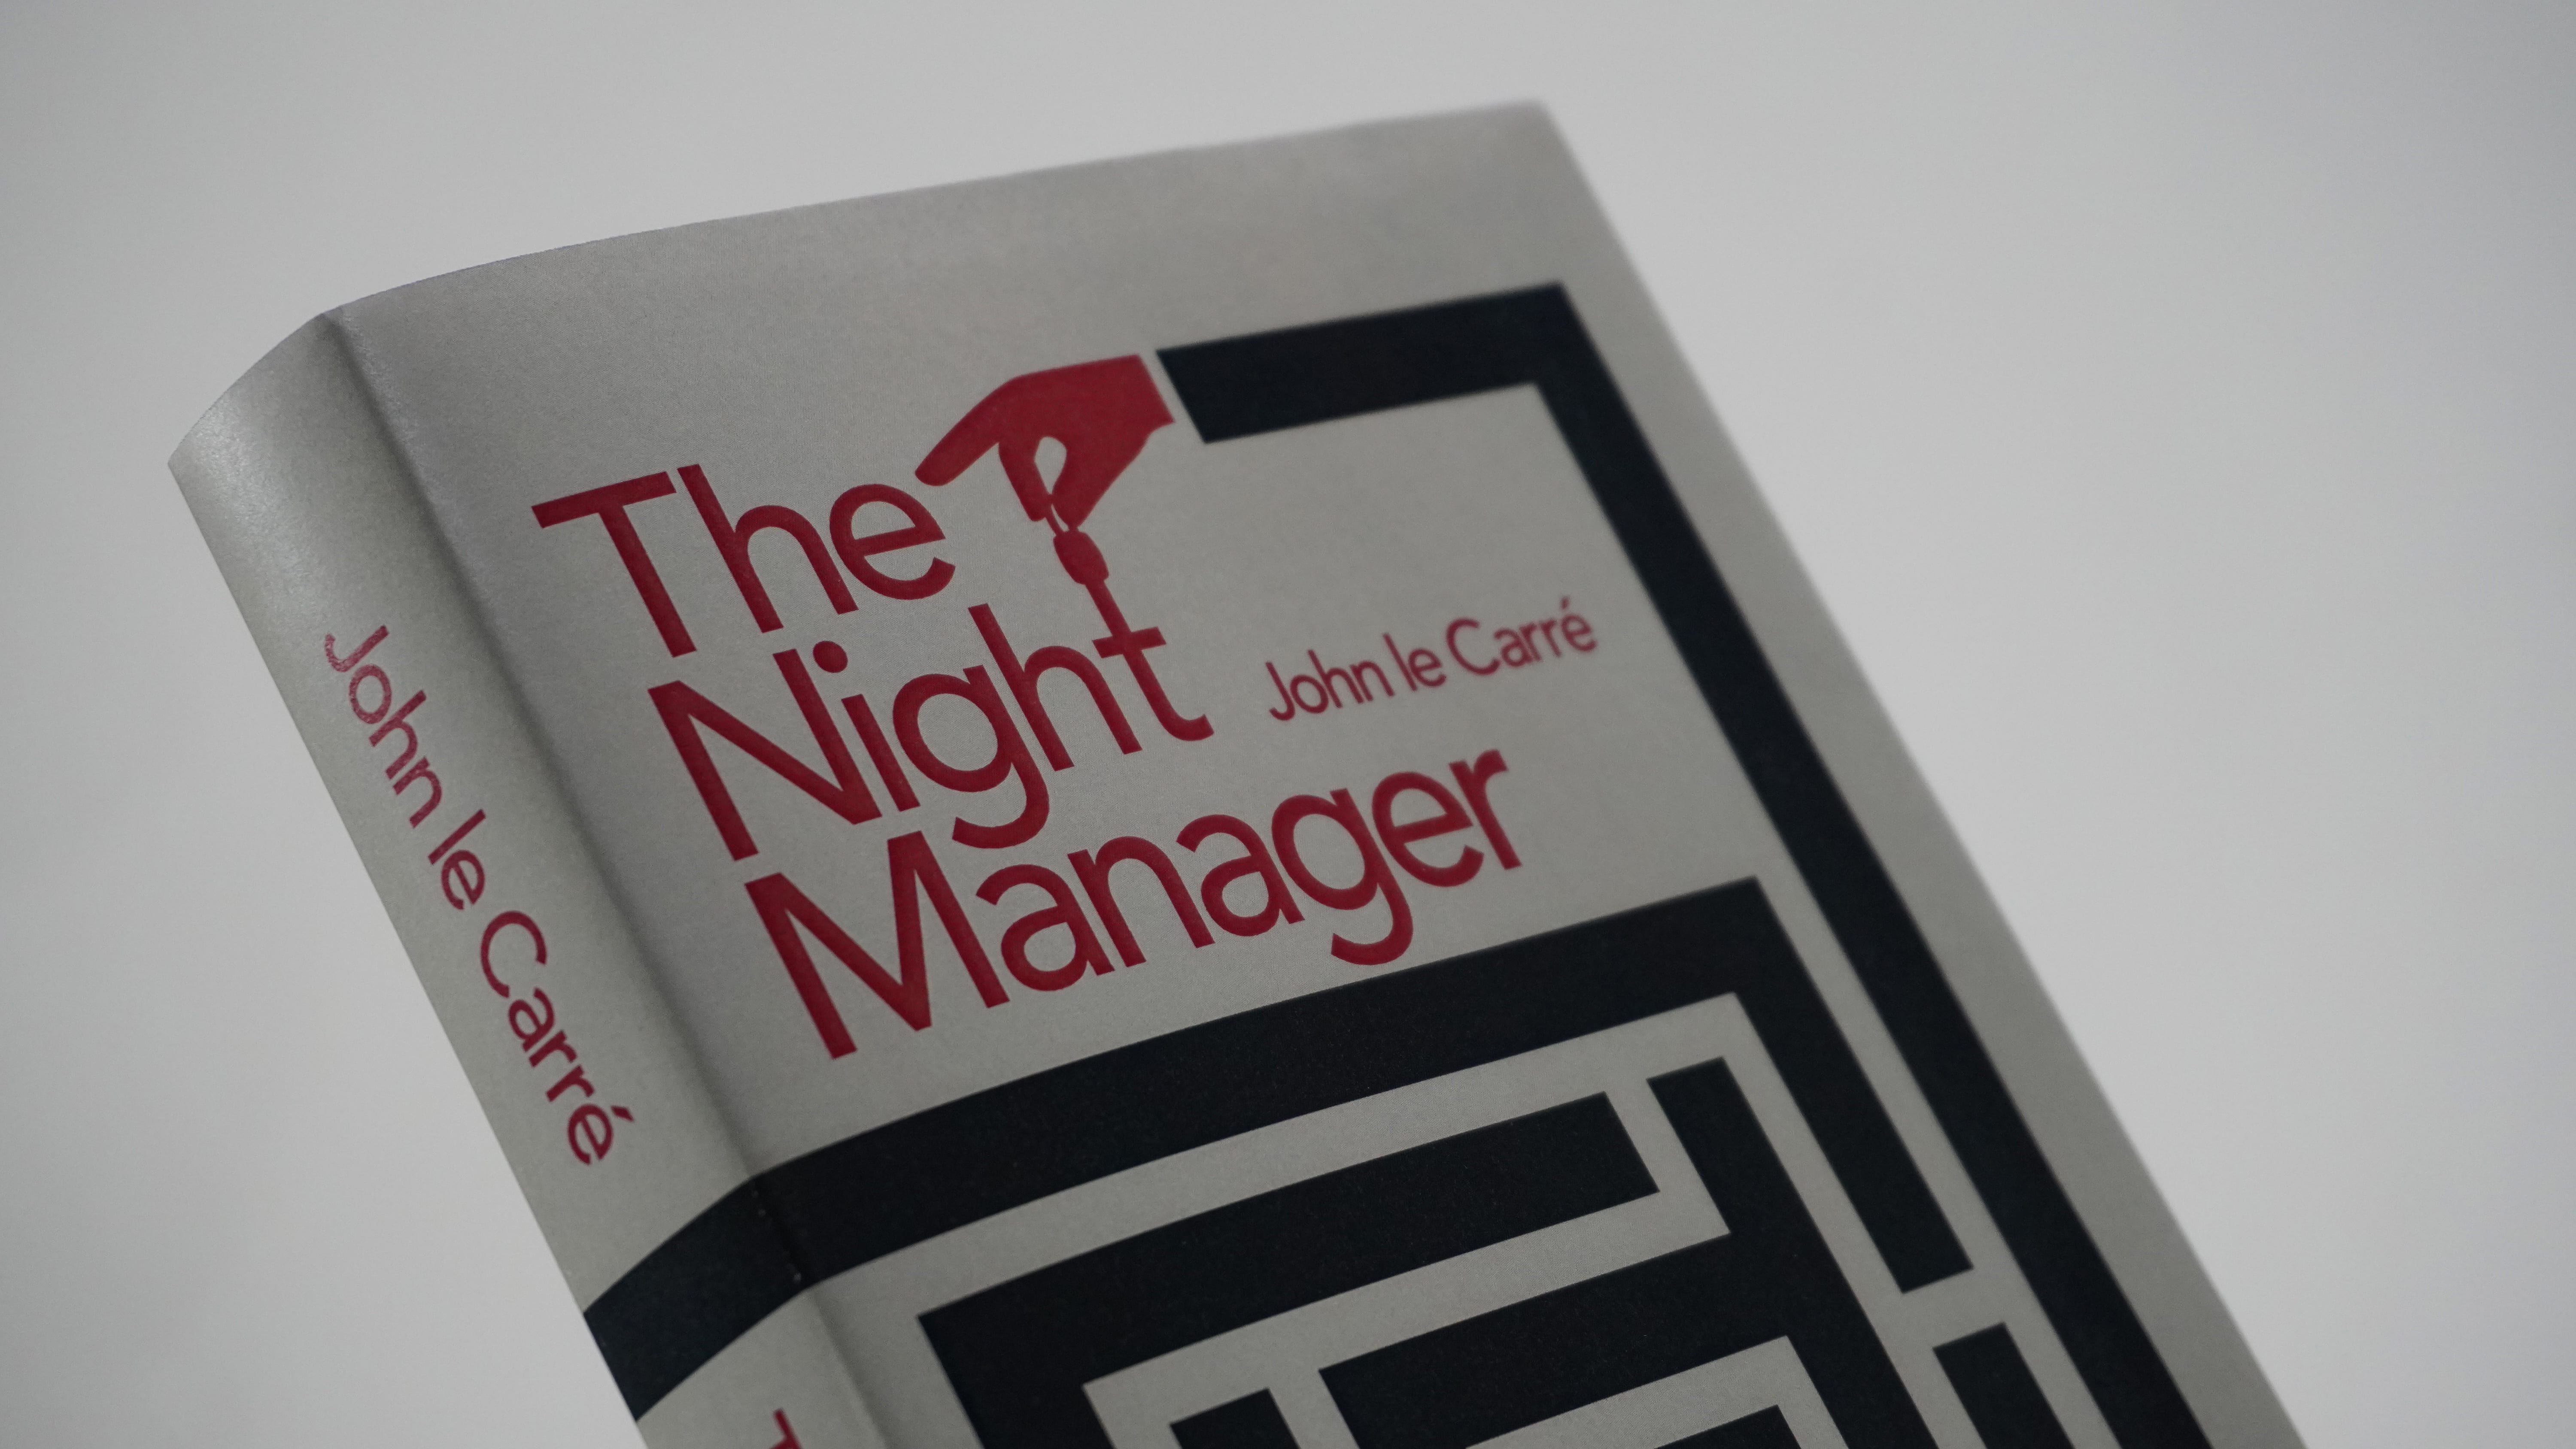 The front cover of 'The night manager'.